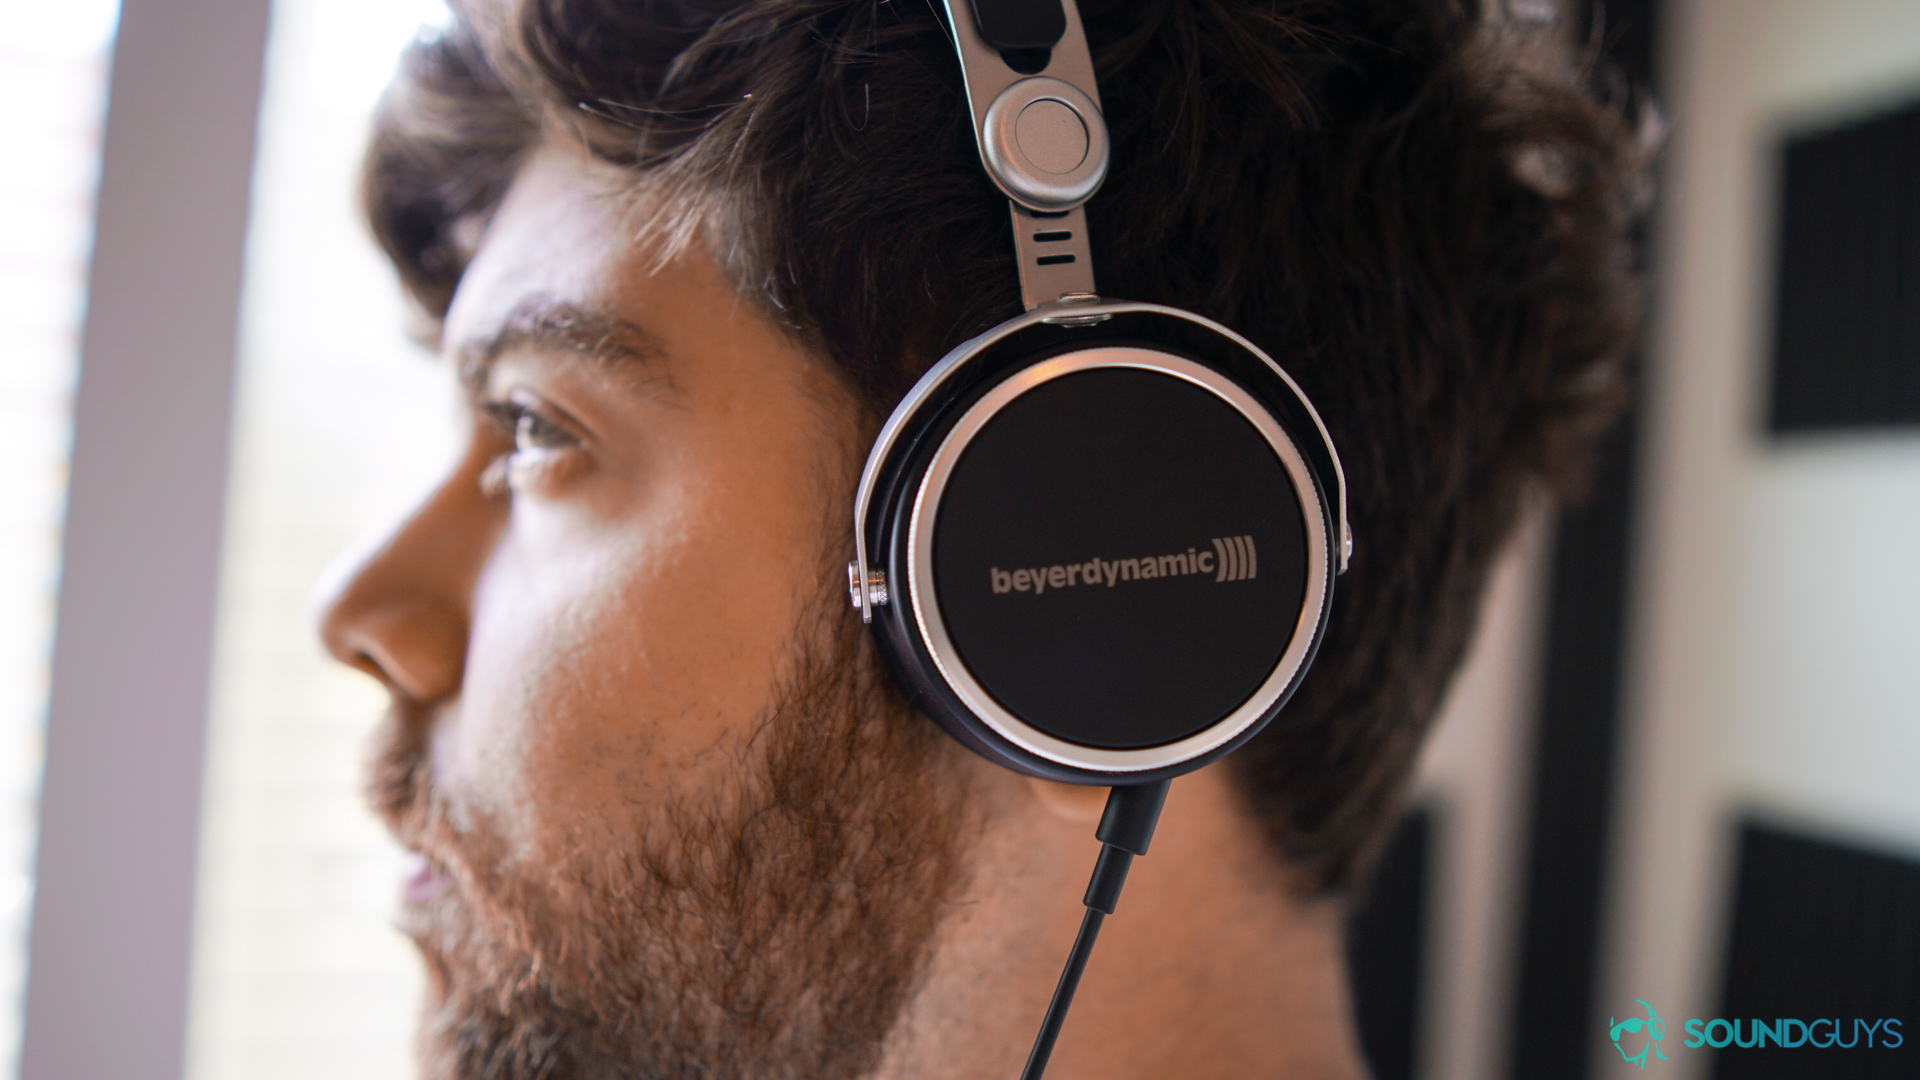 Wearing the Aventho Wired headphones.